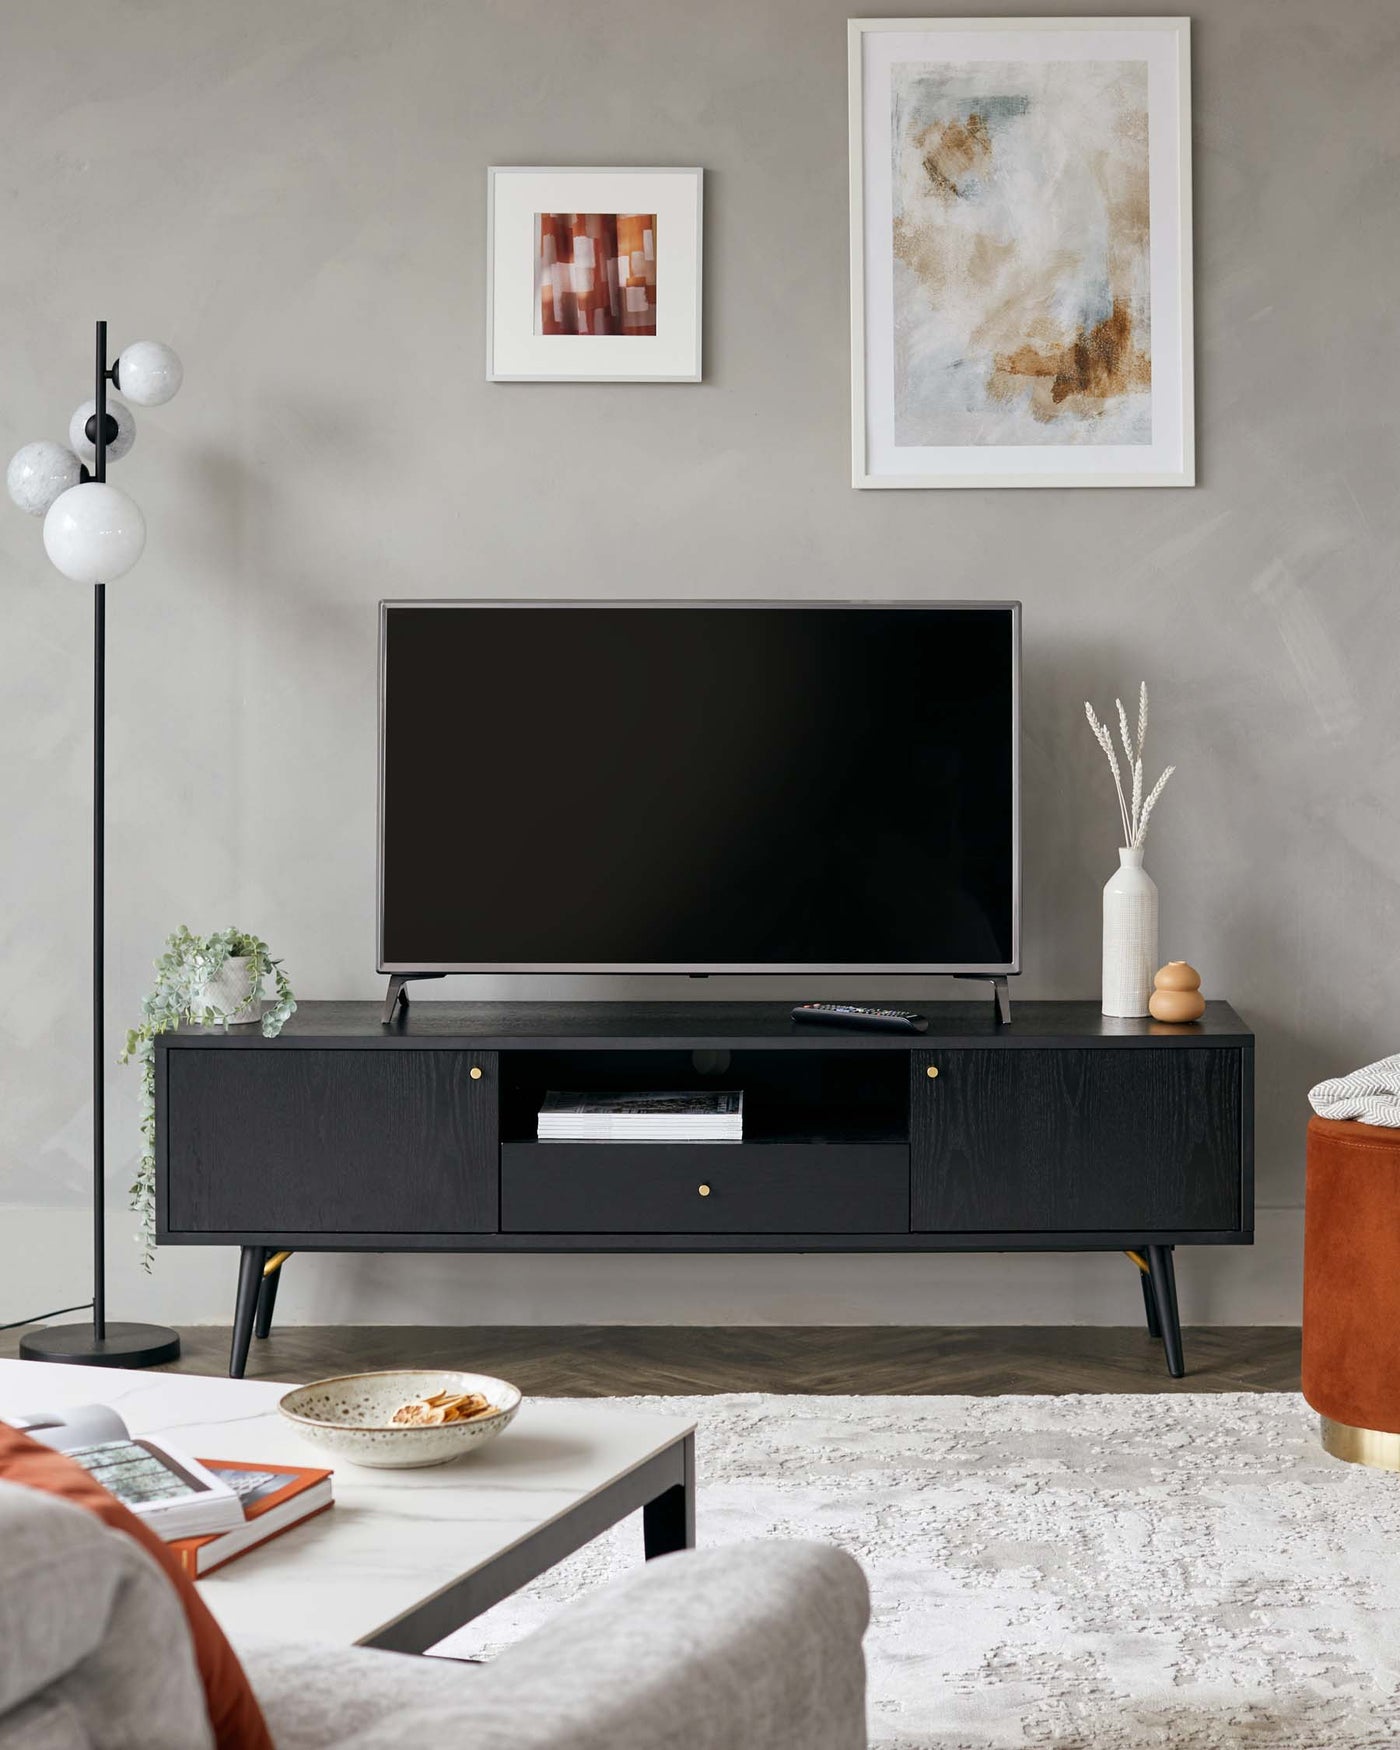 Modern minimalist living room with textured grey walls featuring a sleek black TV console with clean lines and solid rectangular shapes, standing on slender metallic legs. A low-profile round side table with velvety orange upholstery and a gold base complements the scene, and a rectangular coffee table with a grey surface and thin metal frame anchors the space, subtly blending with an off-white textured area rug.